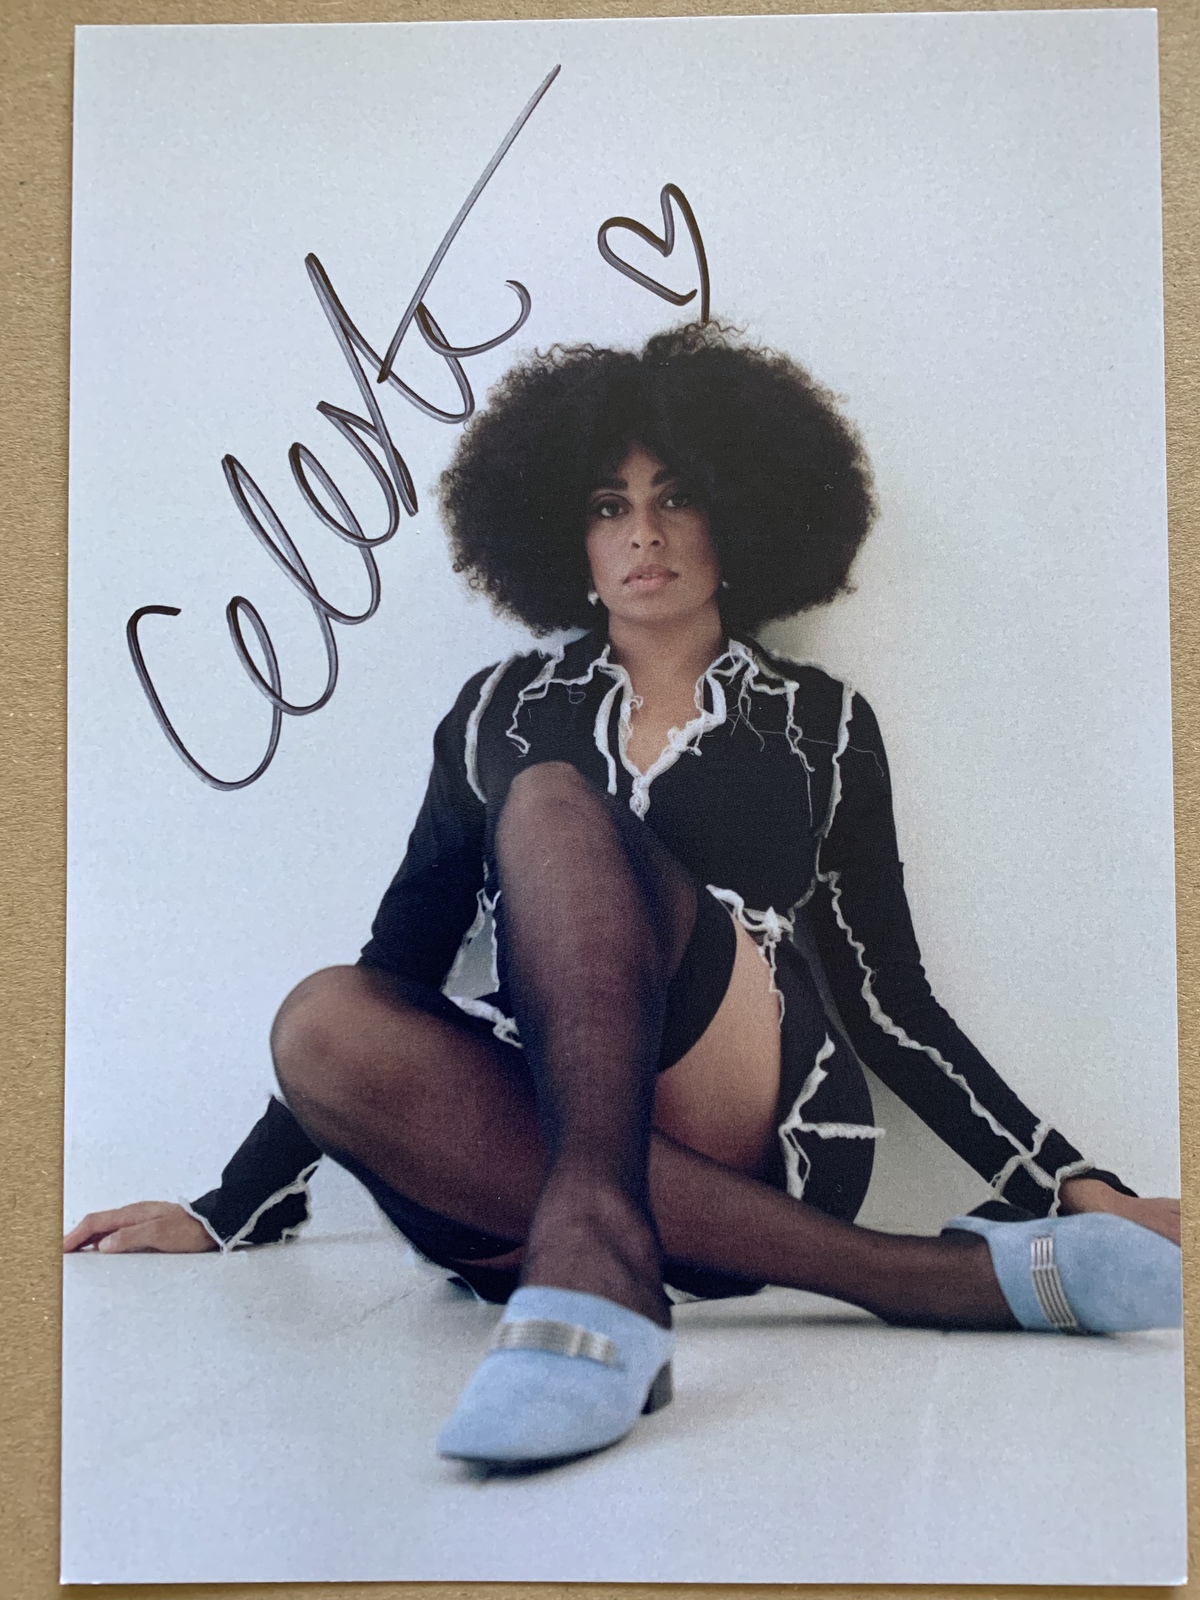 Primary image for Celeste Hand-Signed Autograph 15cm x 20cm With Lifetime Guarantee